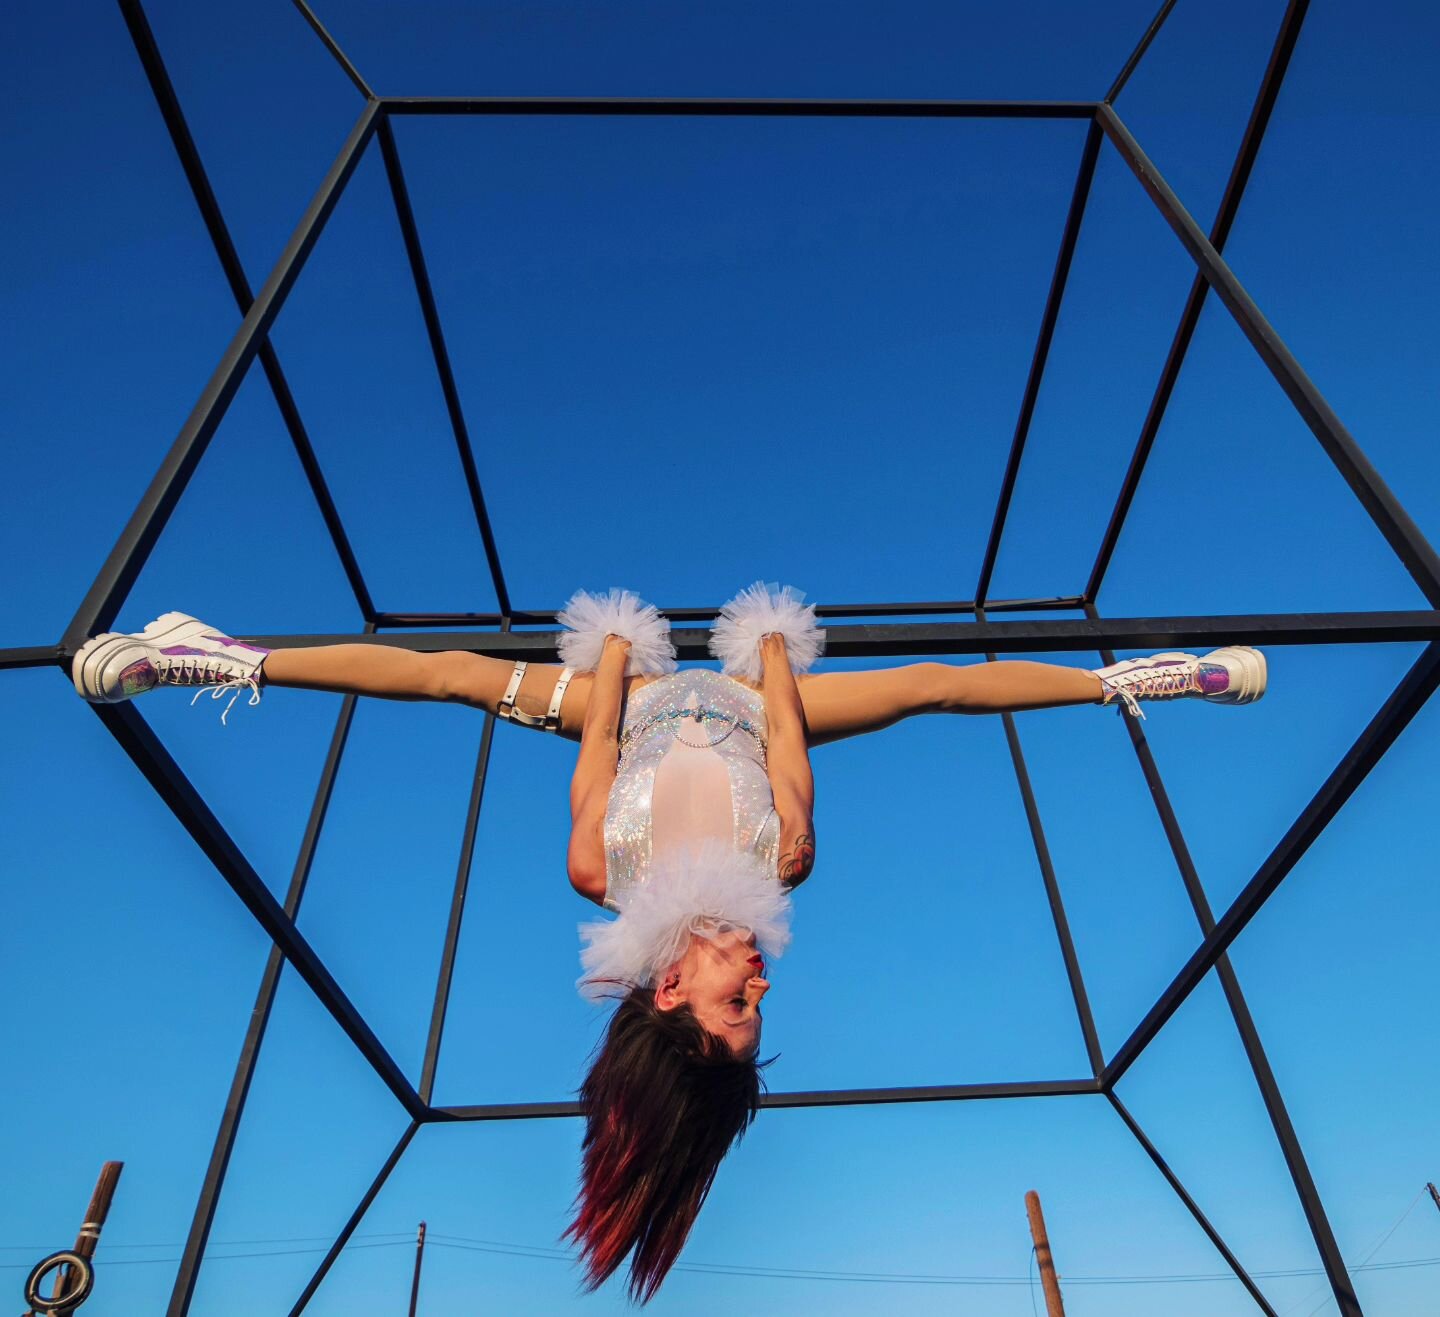 &quot;There is geometry in the humming of the strings, there is music in the spacing of the spheres.&quot;

-Pythagoras

📷: @adam.negrete
-
-
-
-
-
-
-
-
-
-
-
-
#aerialist #trashart #bombaybeach #lifeisbetterupsidedown #acro #aerialacrobatics #circ